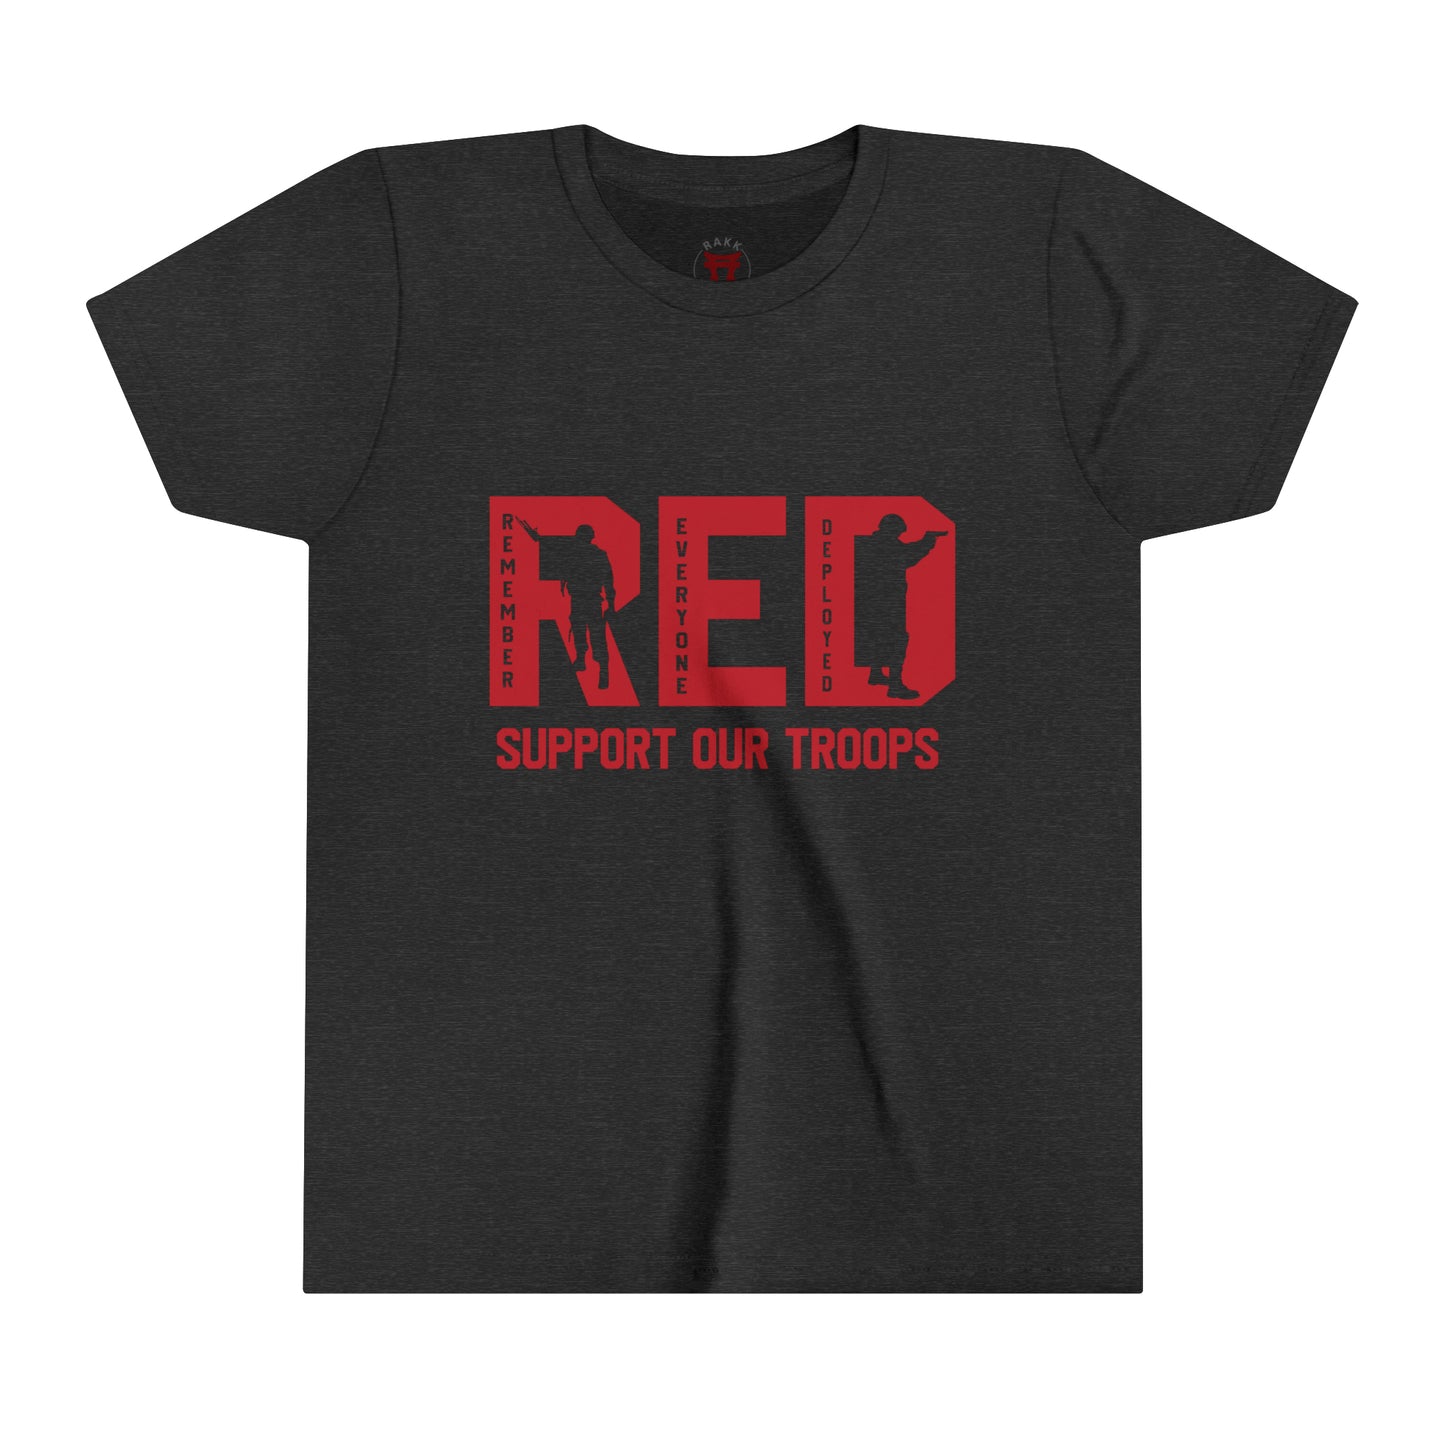 Rakkgear Youth "Remember Everyone Deployed" Dark Grey Tee: Black t-shirt featuring RED letters with 'Support Our Troops' on the front. Iconic Rakkgear Logo on the upper back.